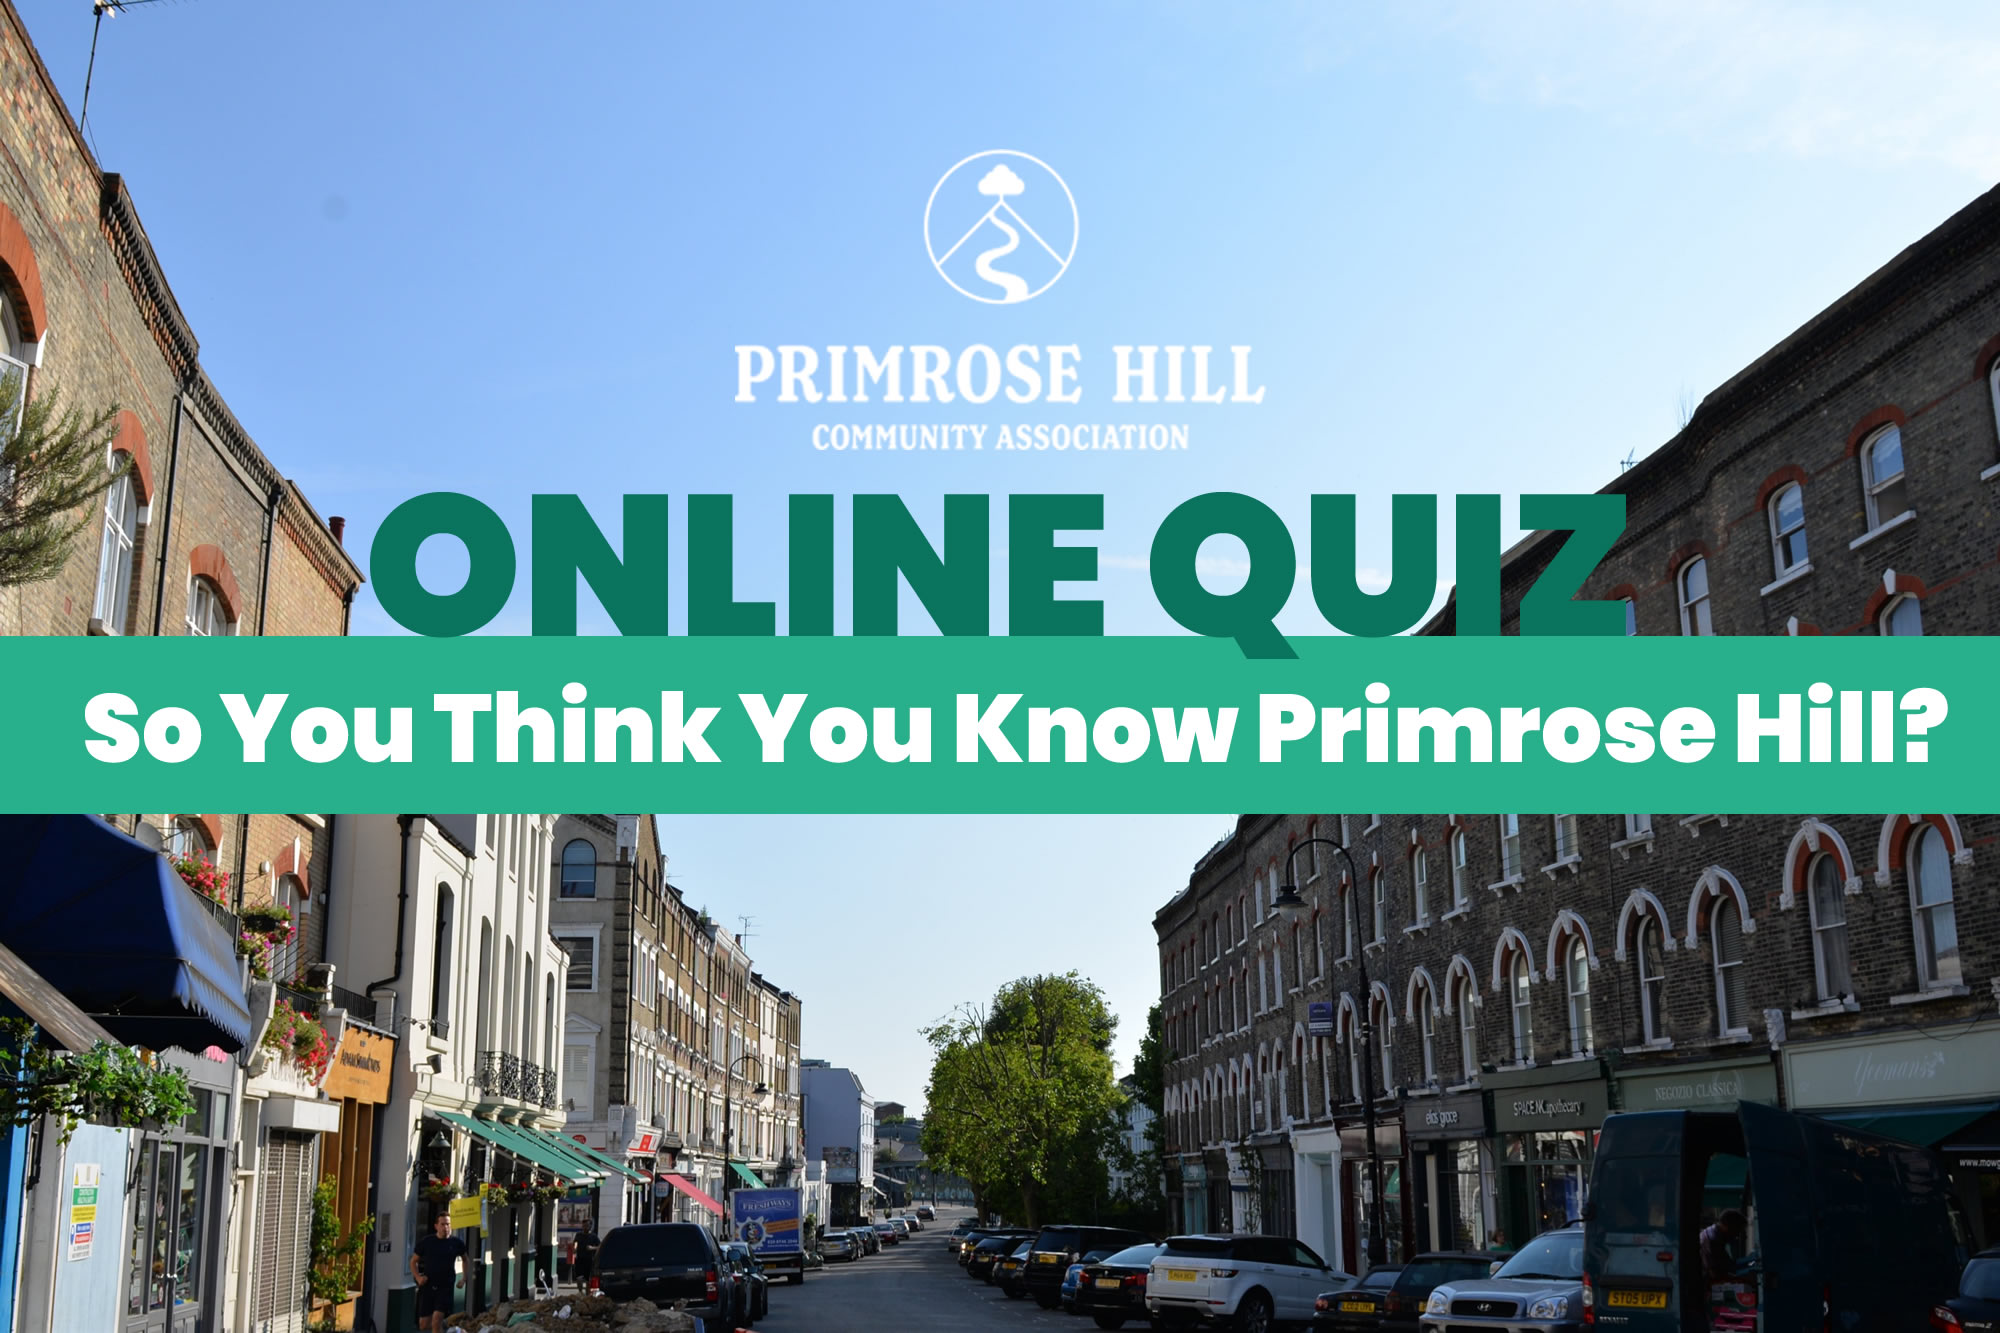 Quiz - So You Think You Know Primrose Hill?